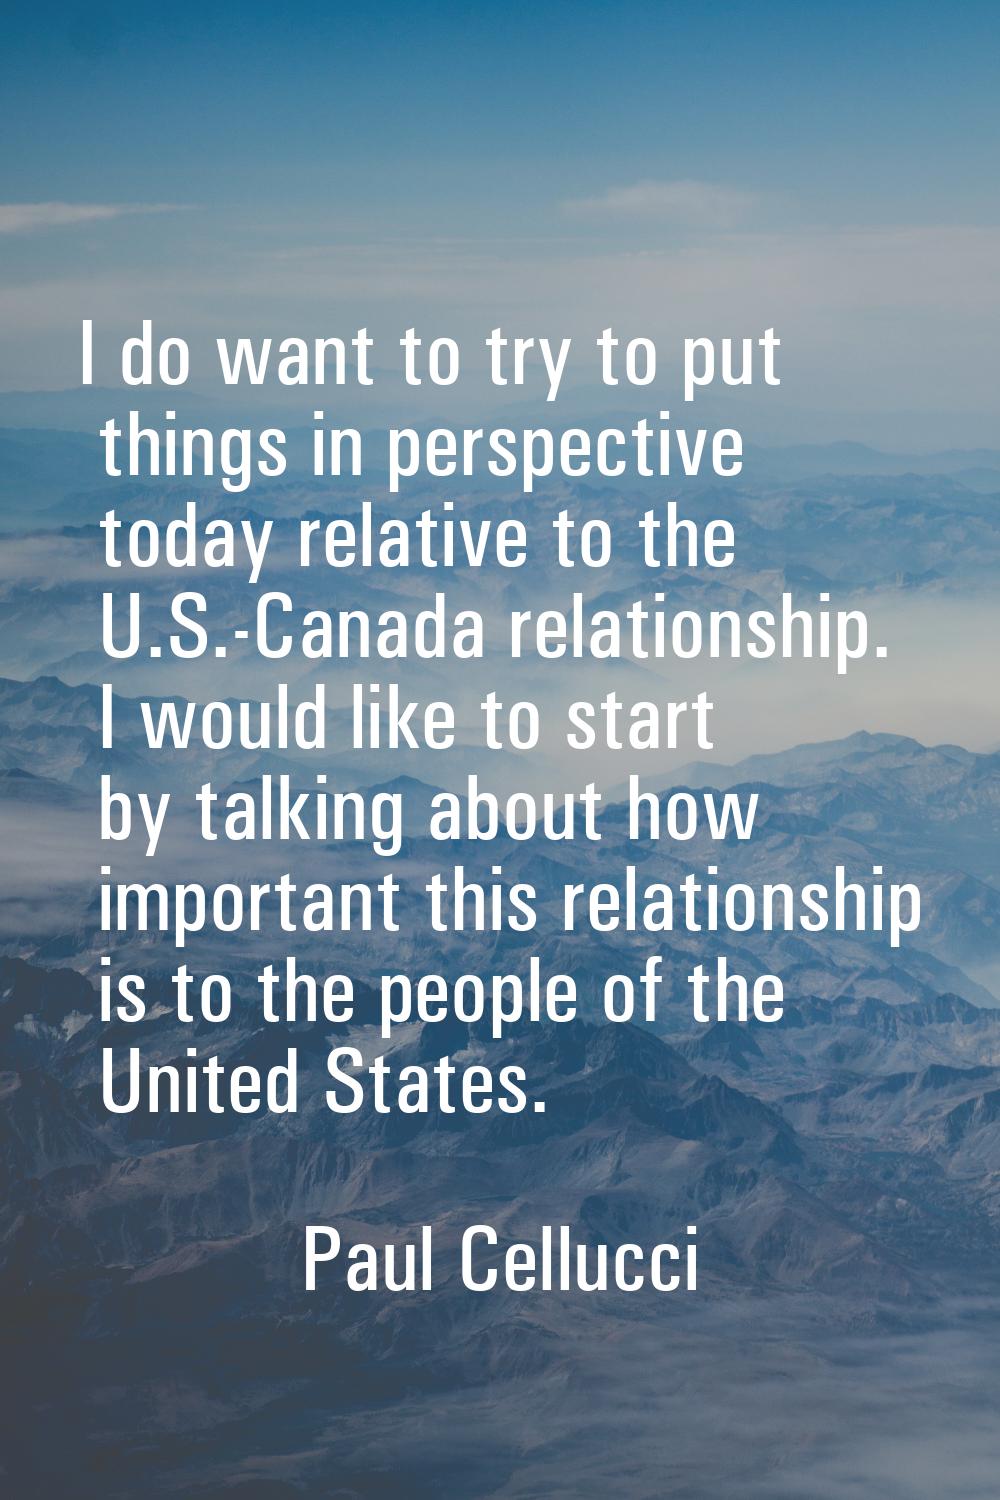 I do want to try to put things in perspective today relative to the U.S.-Canada relationship. I wou